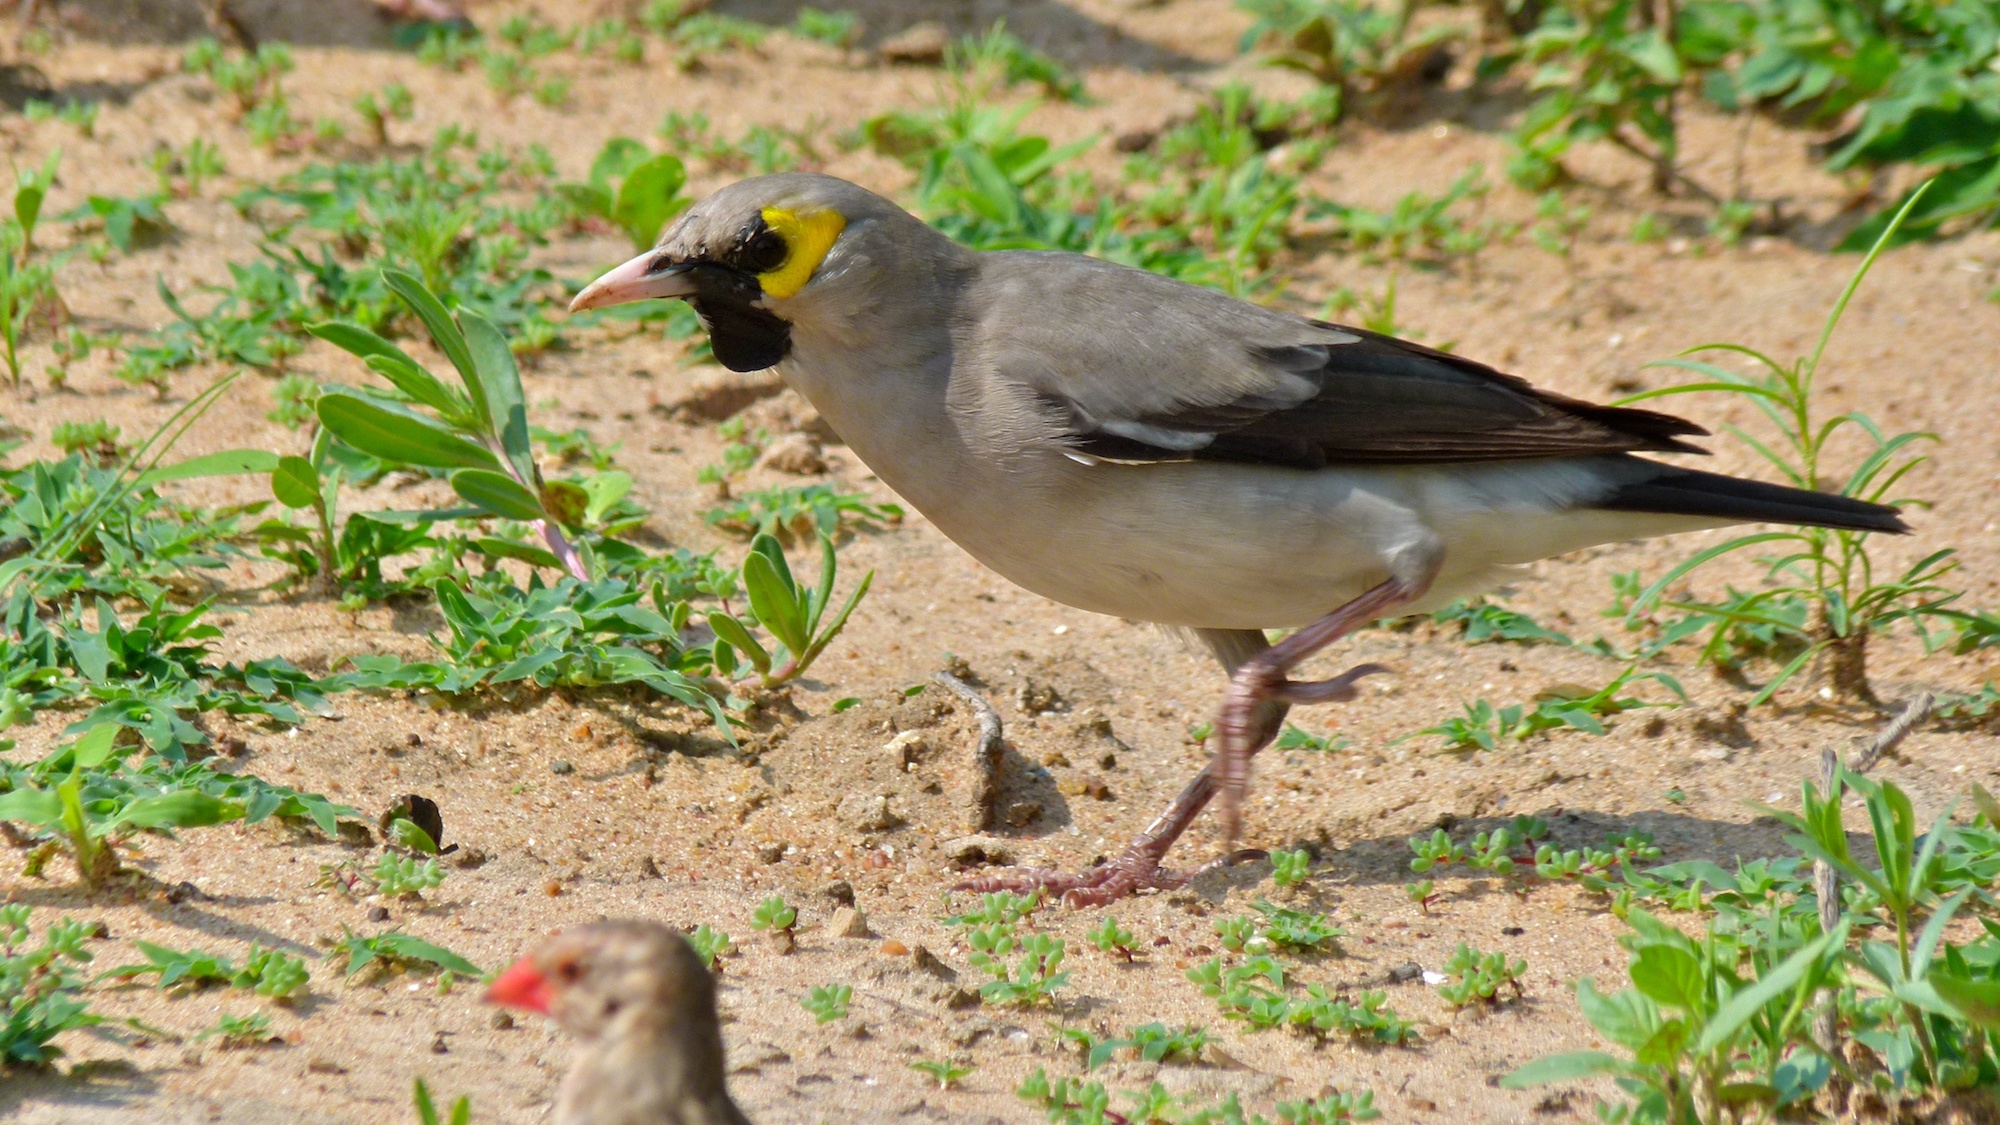 Close up of grey, black & yellow bird in the grass